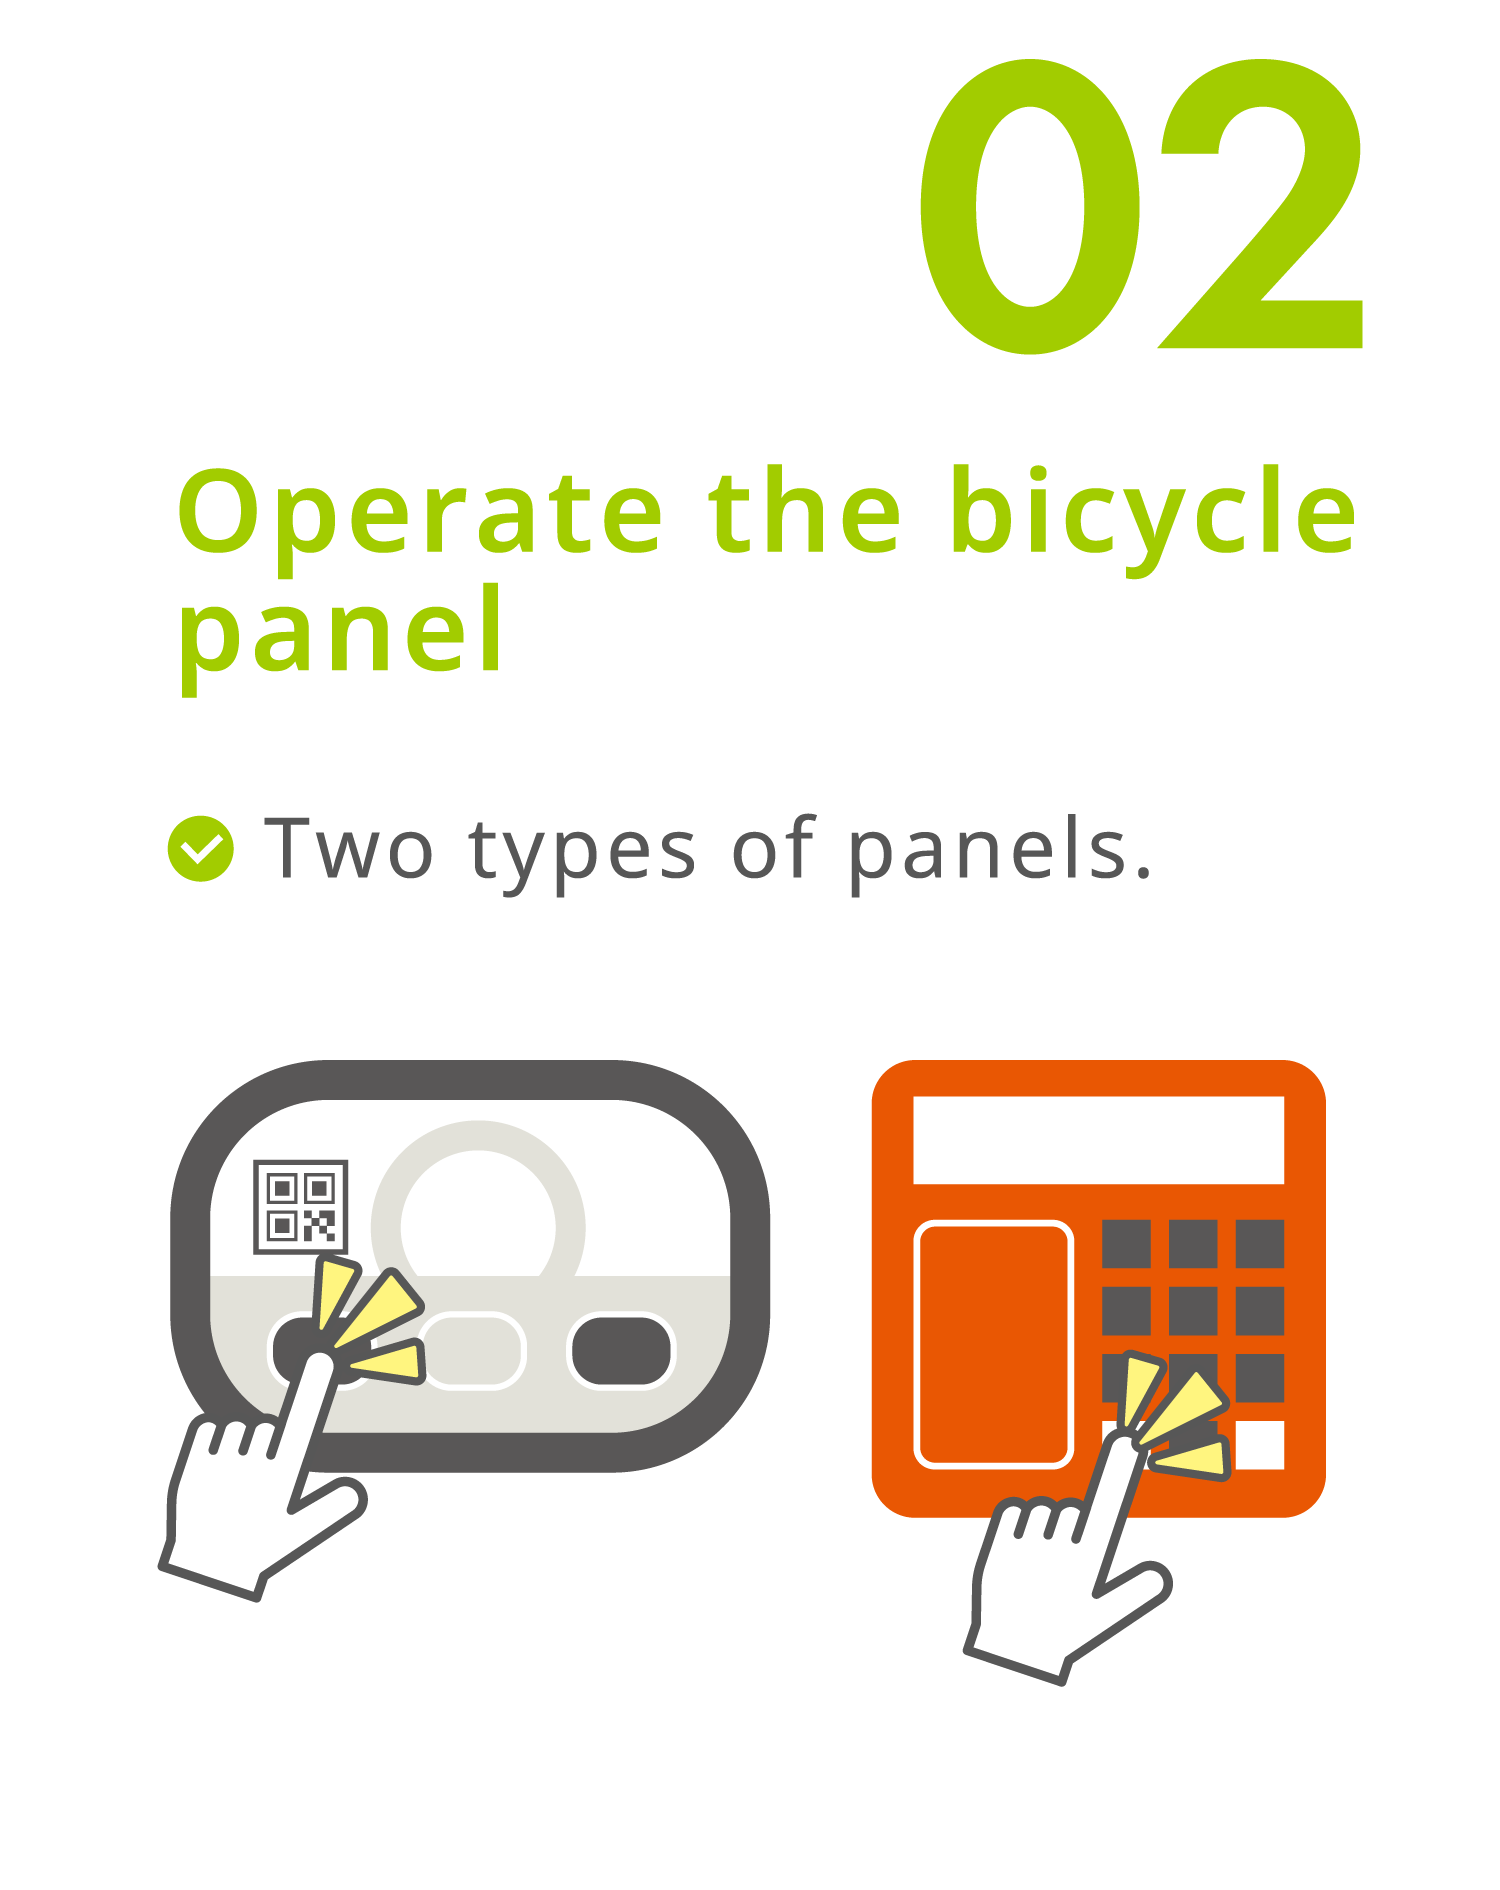 02 ) Operate the bicycle panel -Two types of panels.